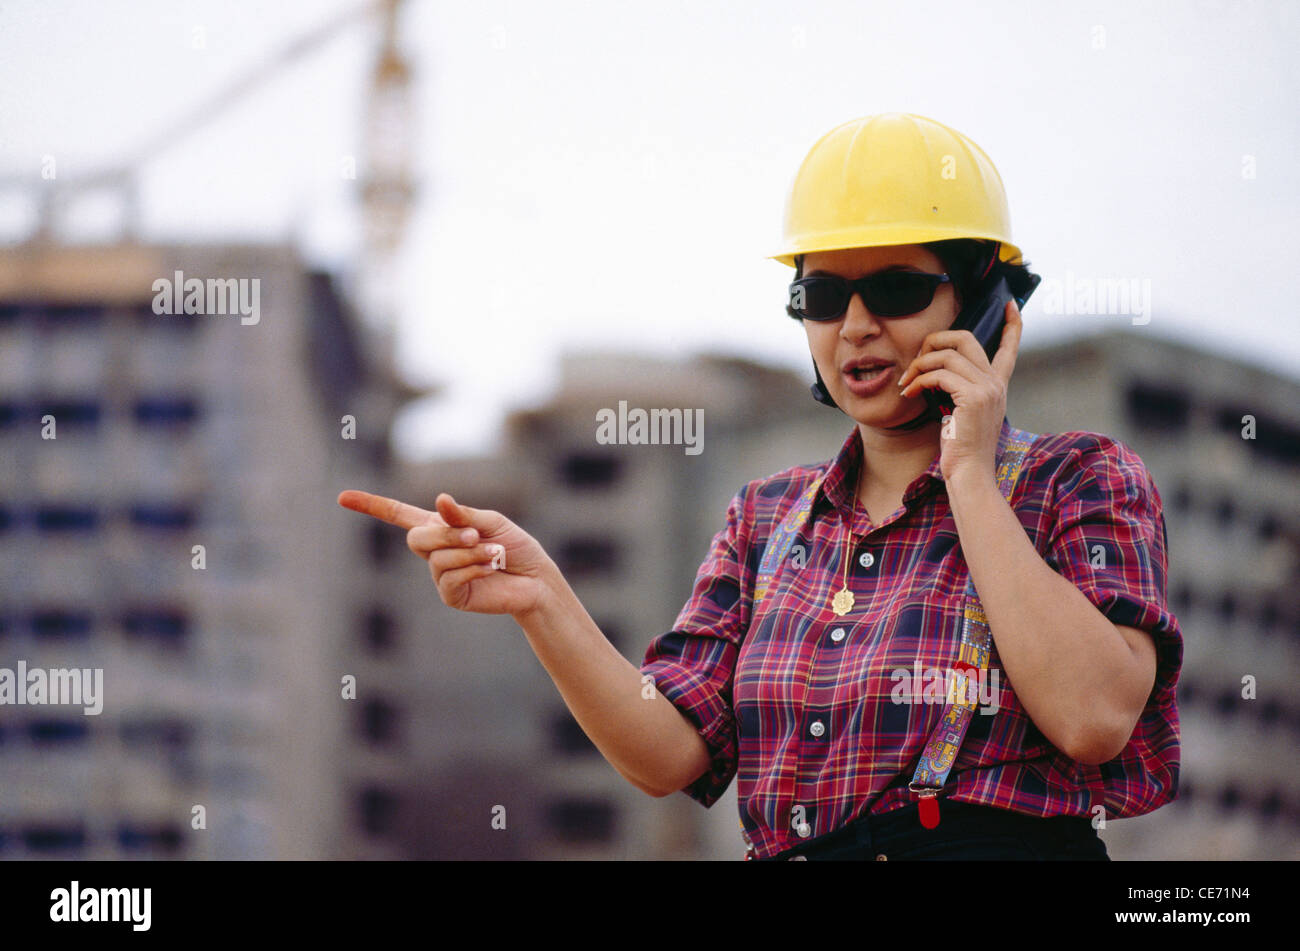 PRG 84182 : construction working woman talking on mobile phone   Model Released Stock Photo